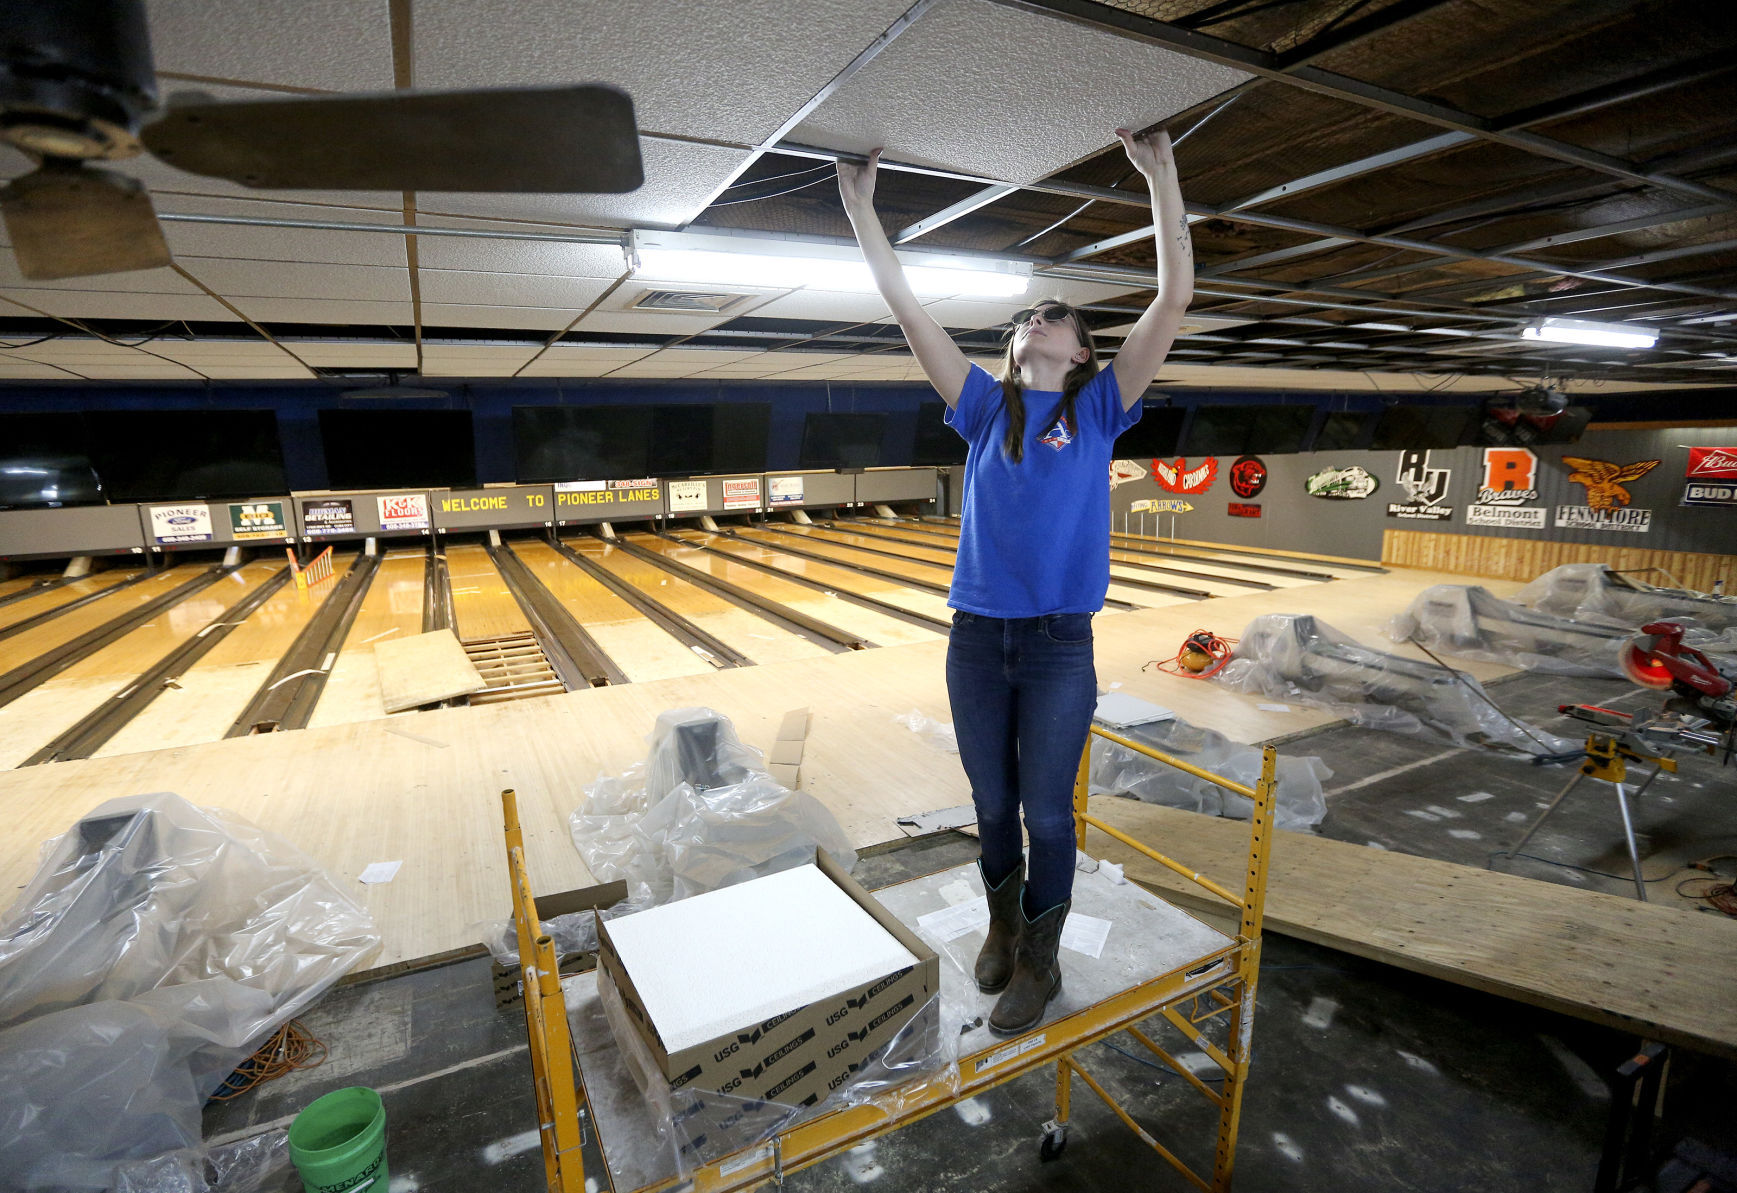 Maddy Haack installs a drop ceiling at Pioneer Lanes in Platteville, Wis., on Tuesday. Repair and renovation work at the facility continues after a fire caused major damage last month. PHOTO CREDIT: Dave Kettering